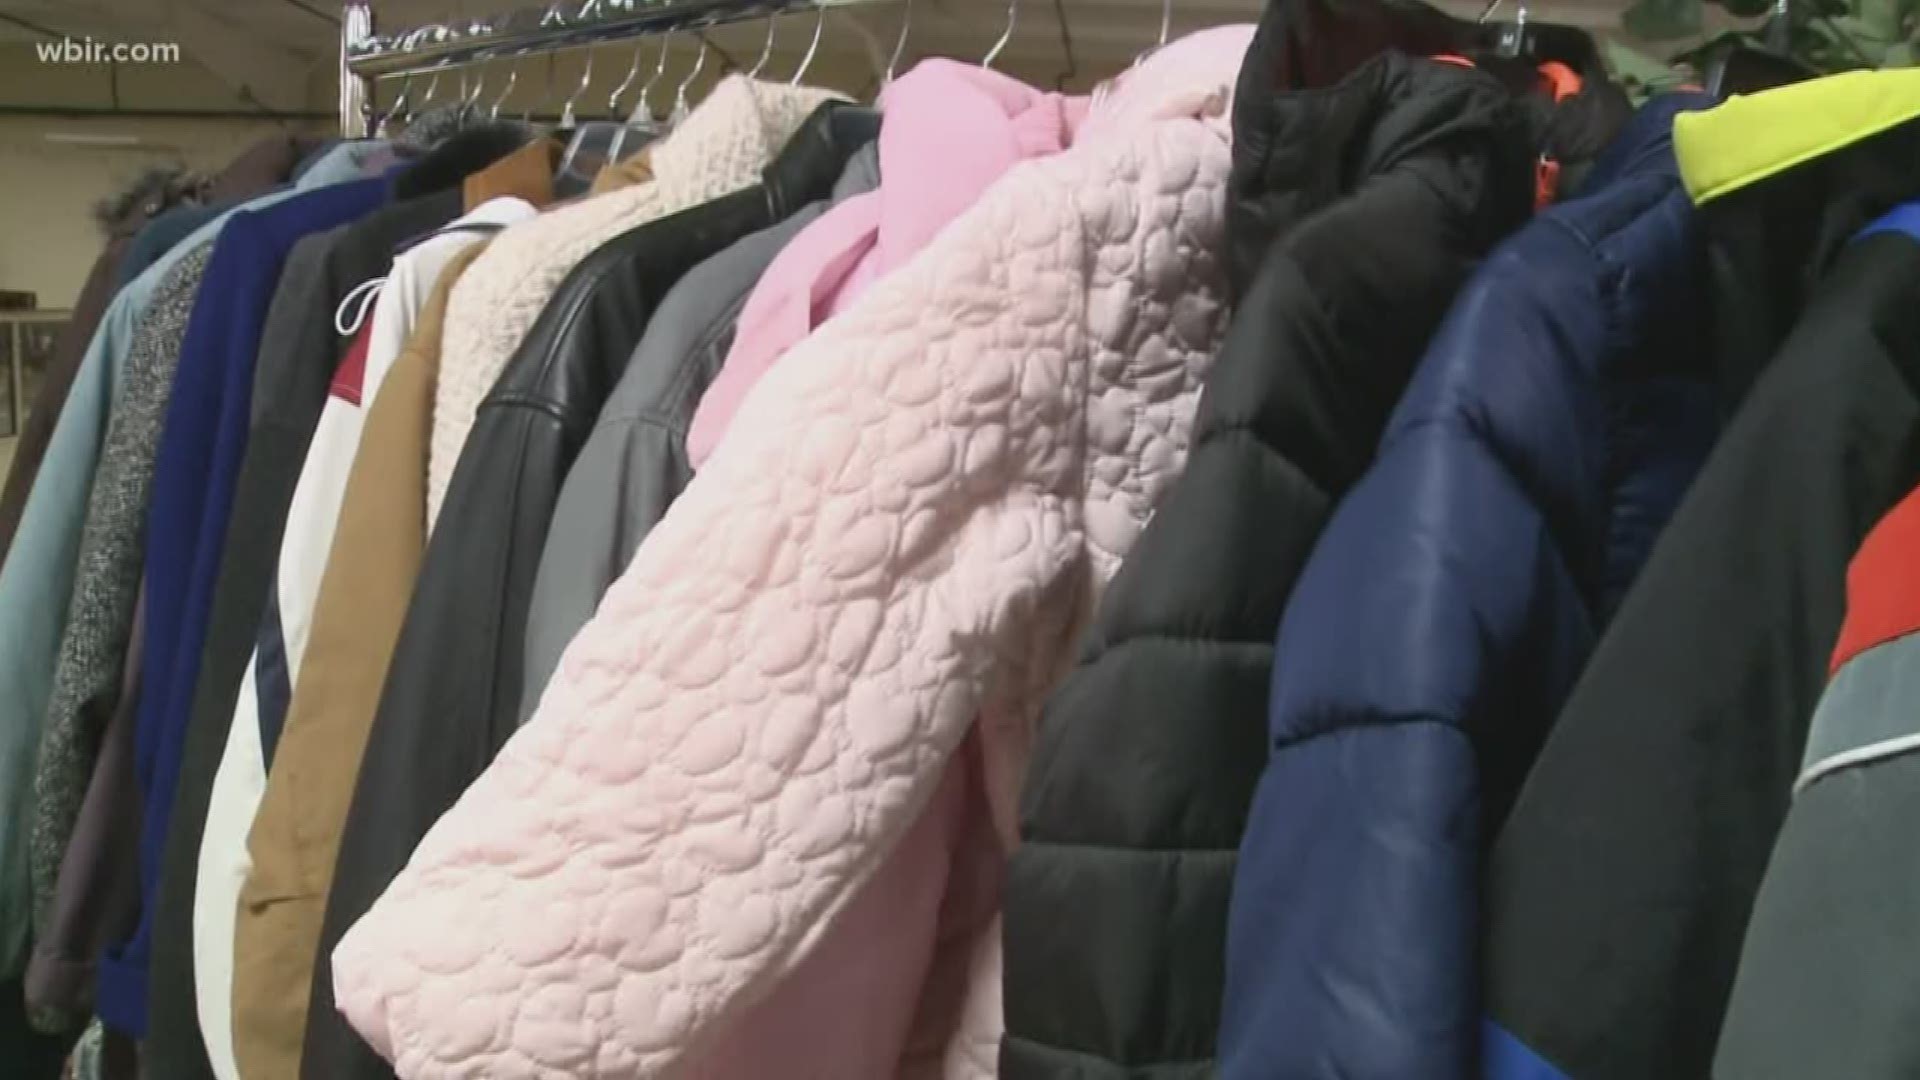 The National Center for Children in Poverty notes nearly 15 million children live below the poverty line. Experts believe many won't have a winter coat.